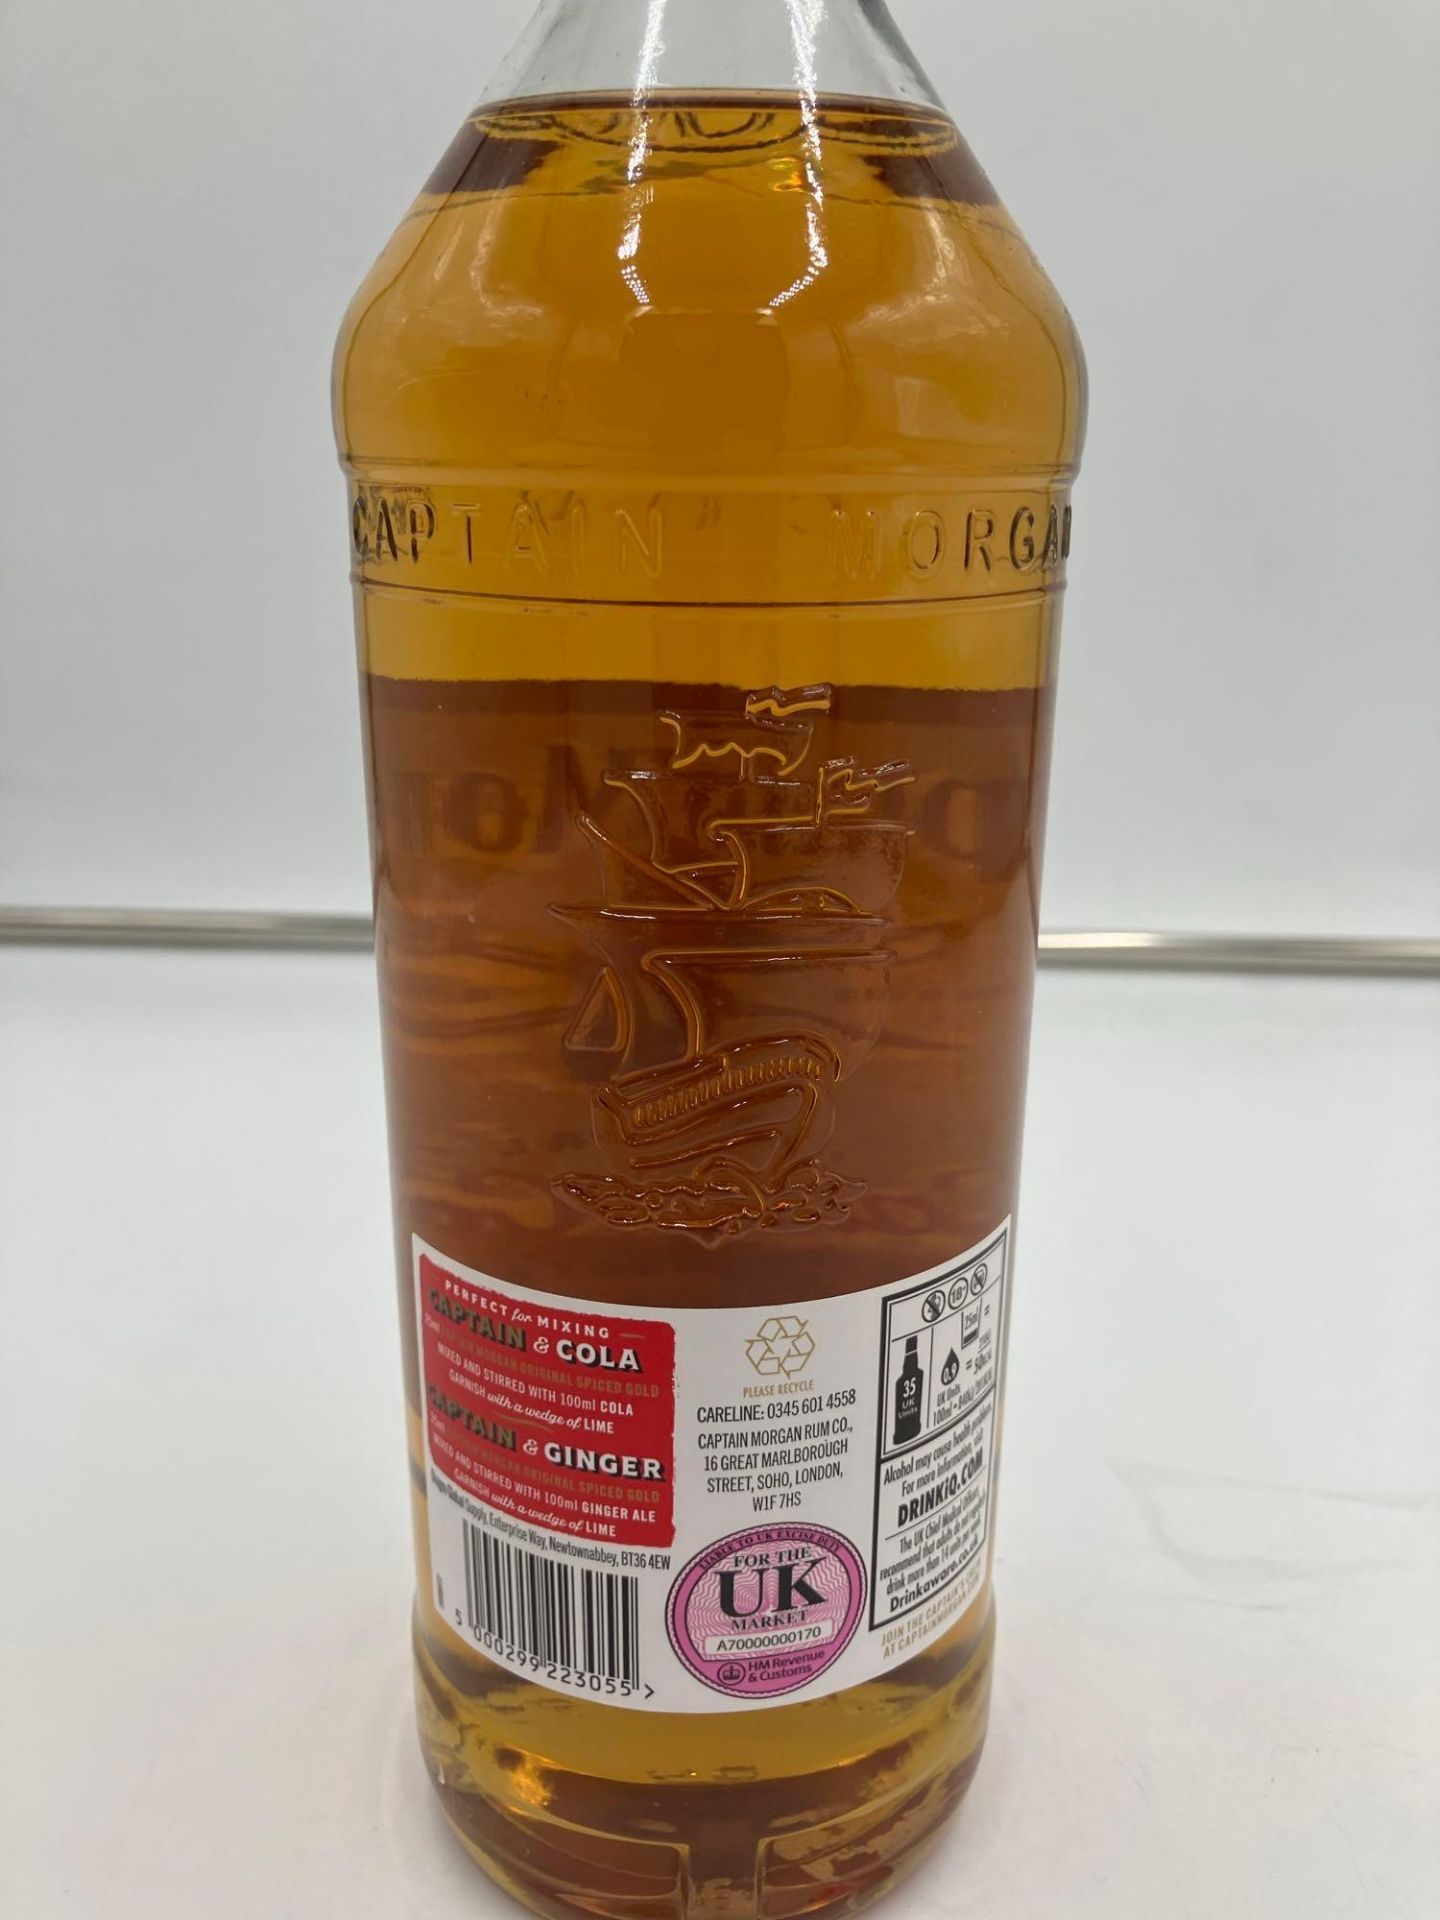 CAPTAIN MORGAN SPICED GOLD RUM - 1L - 9823 - Image 4 of 4